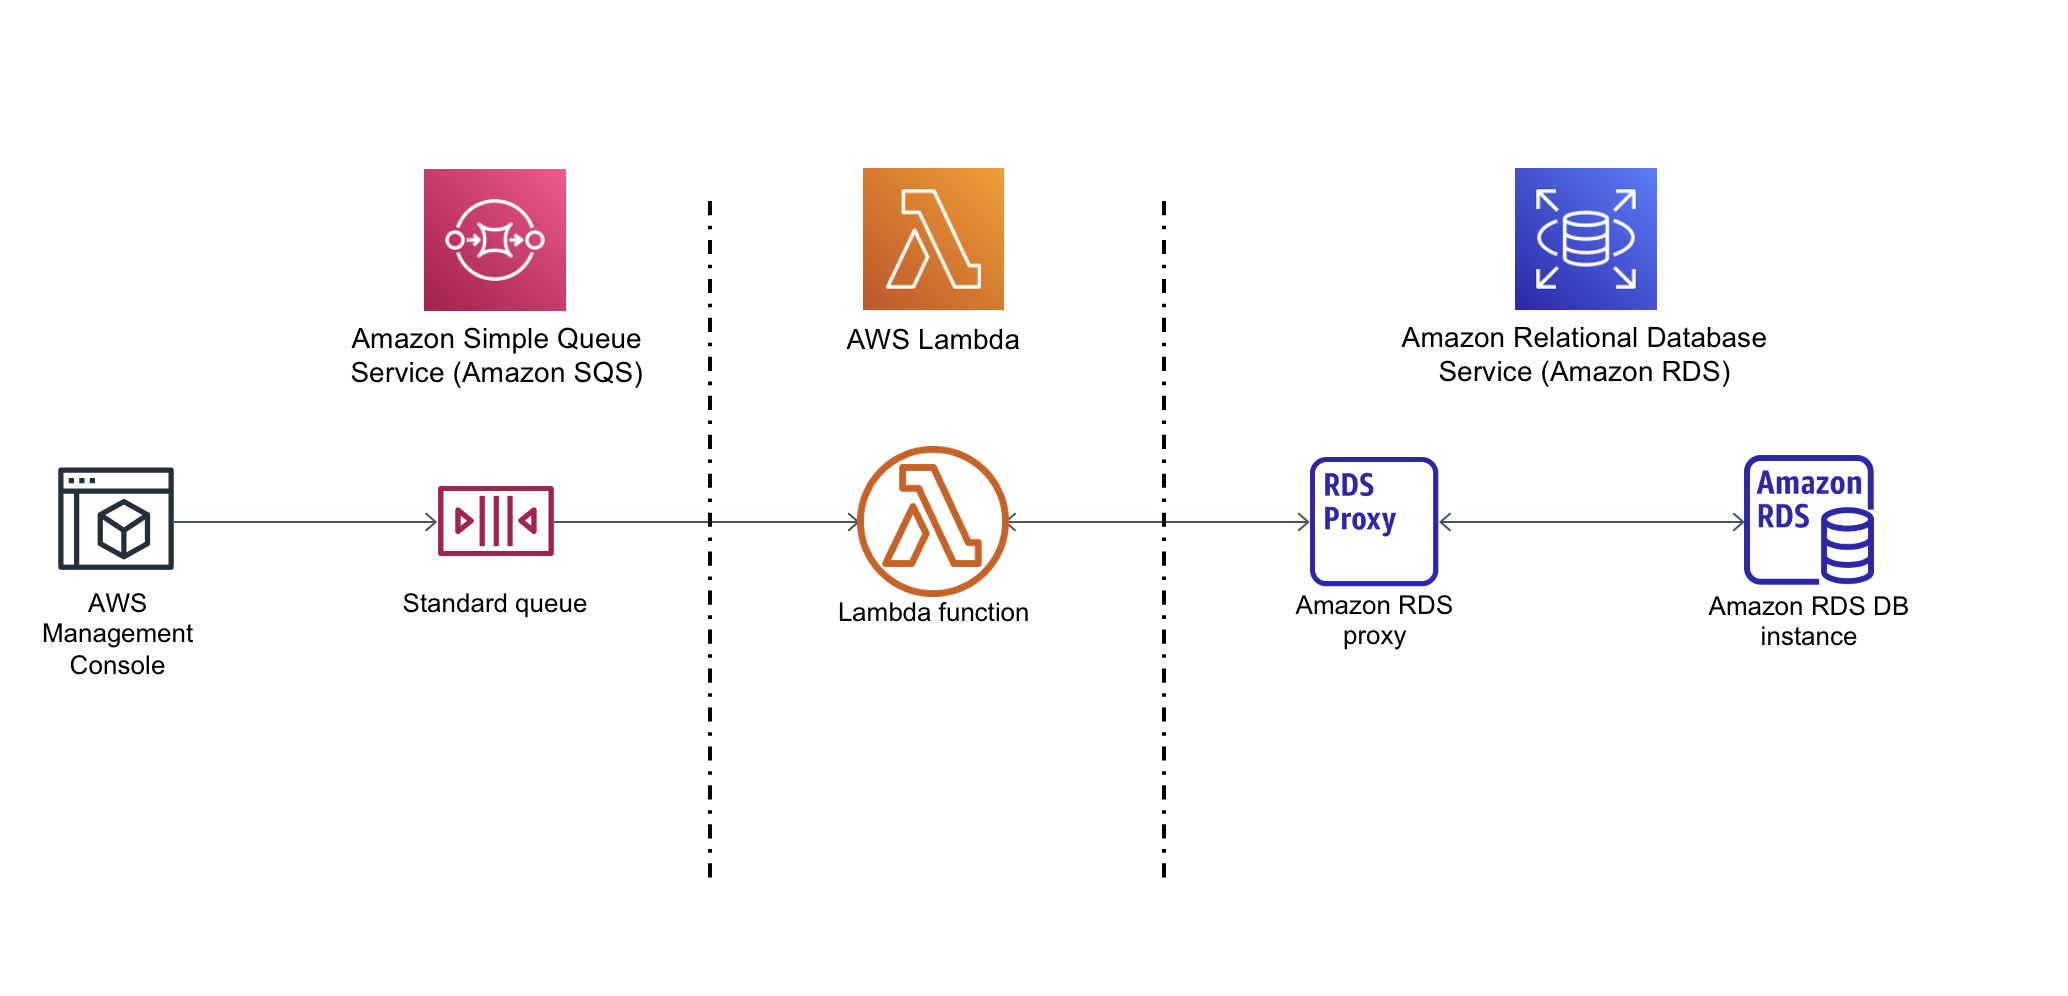 
      An instance of the AWS Management Console connects to an Amazon SQS standard queue, which connects to a
        Lambda function, which further connects to a RDS for MySQL database through RDS Proxy.
    